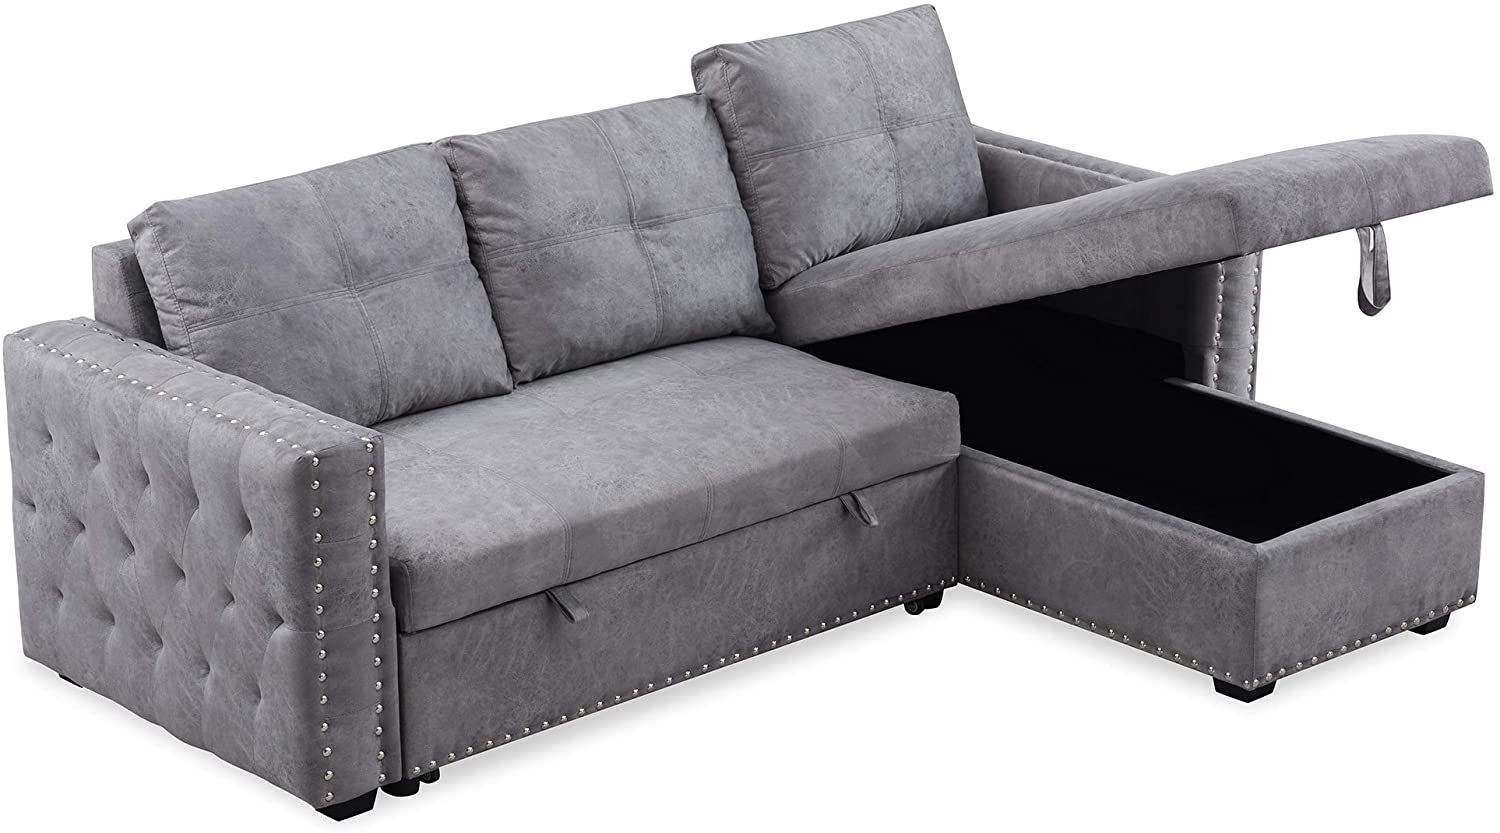 Wholesale 91" Reversible Sleeper Sectional Sofa 3 Seat With Nail Head With 3 In 1 Gray Pull Out Sleeper Sofas (View 11 of 20)